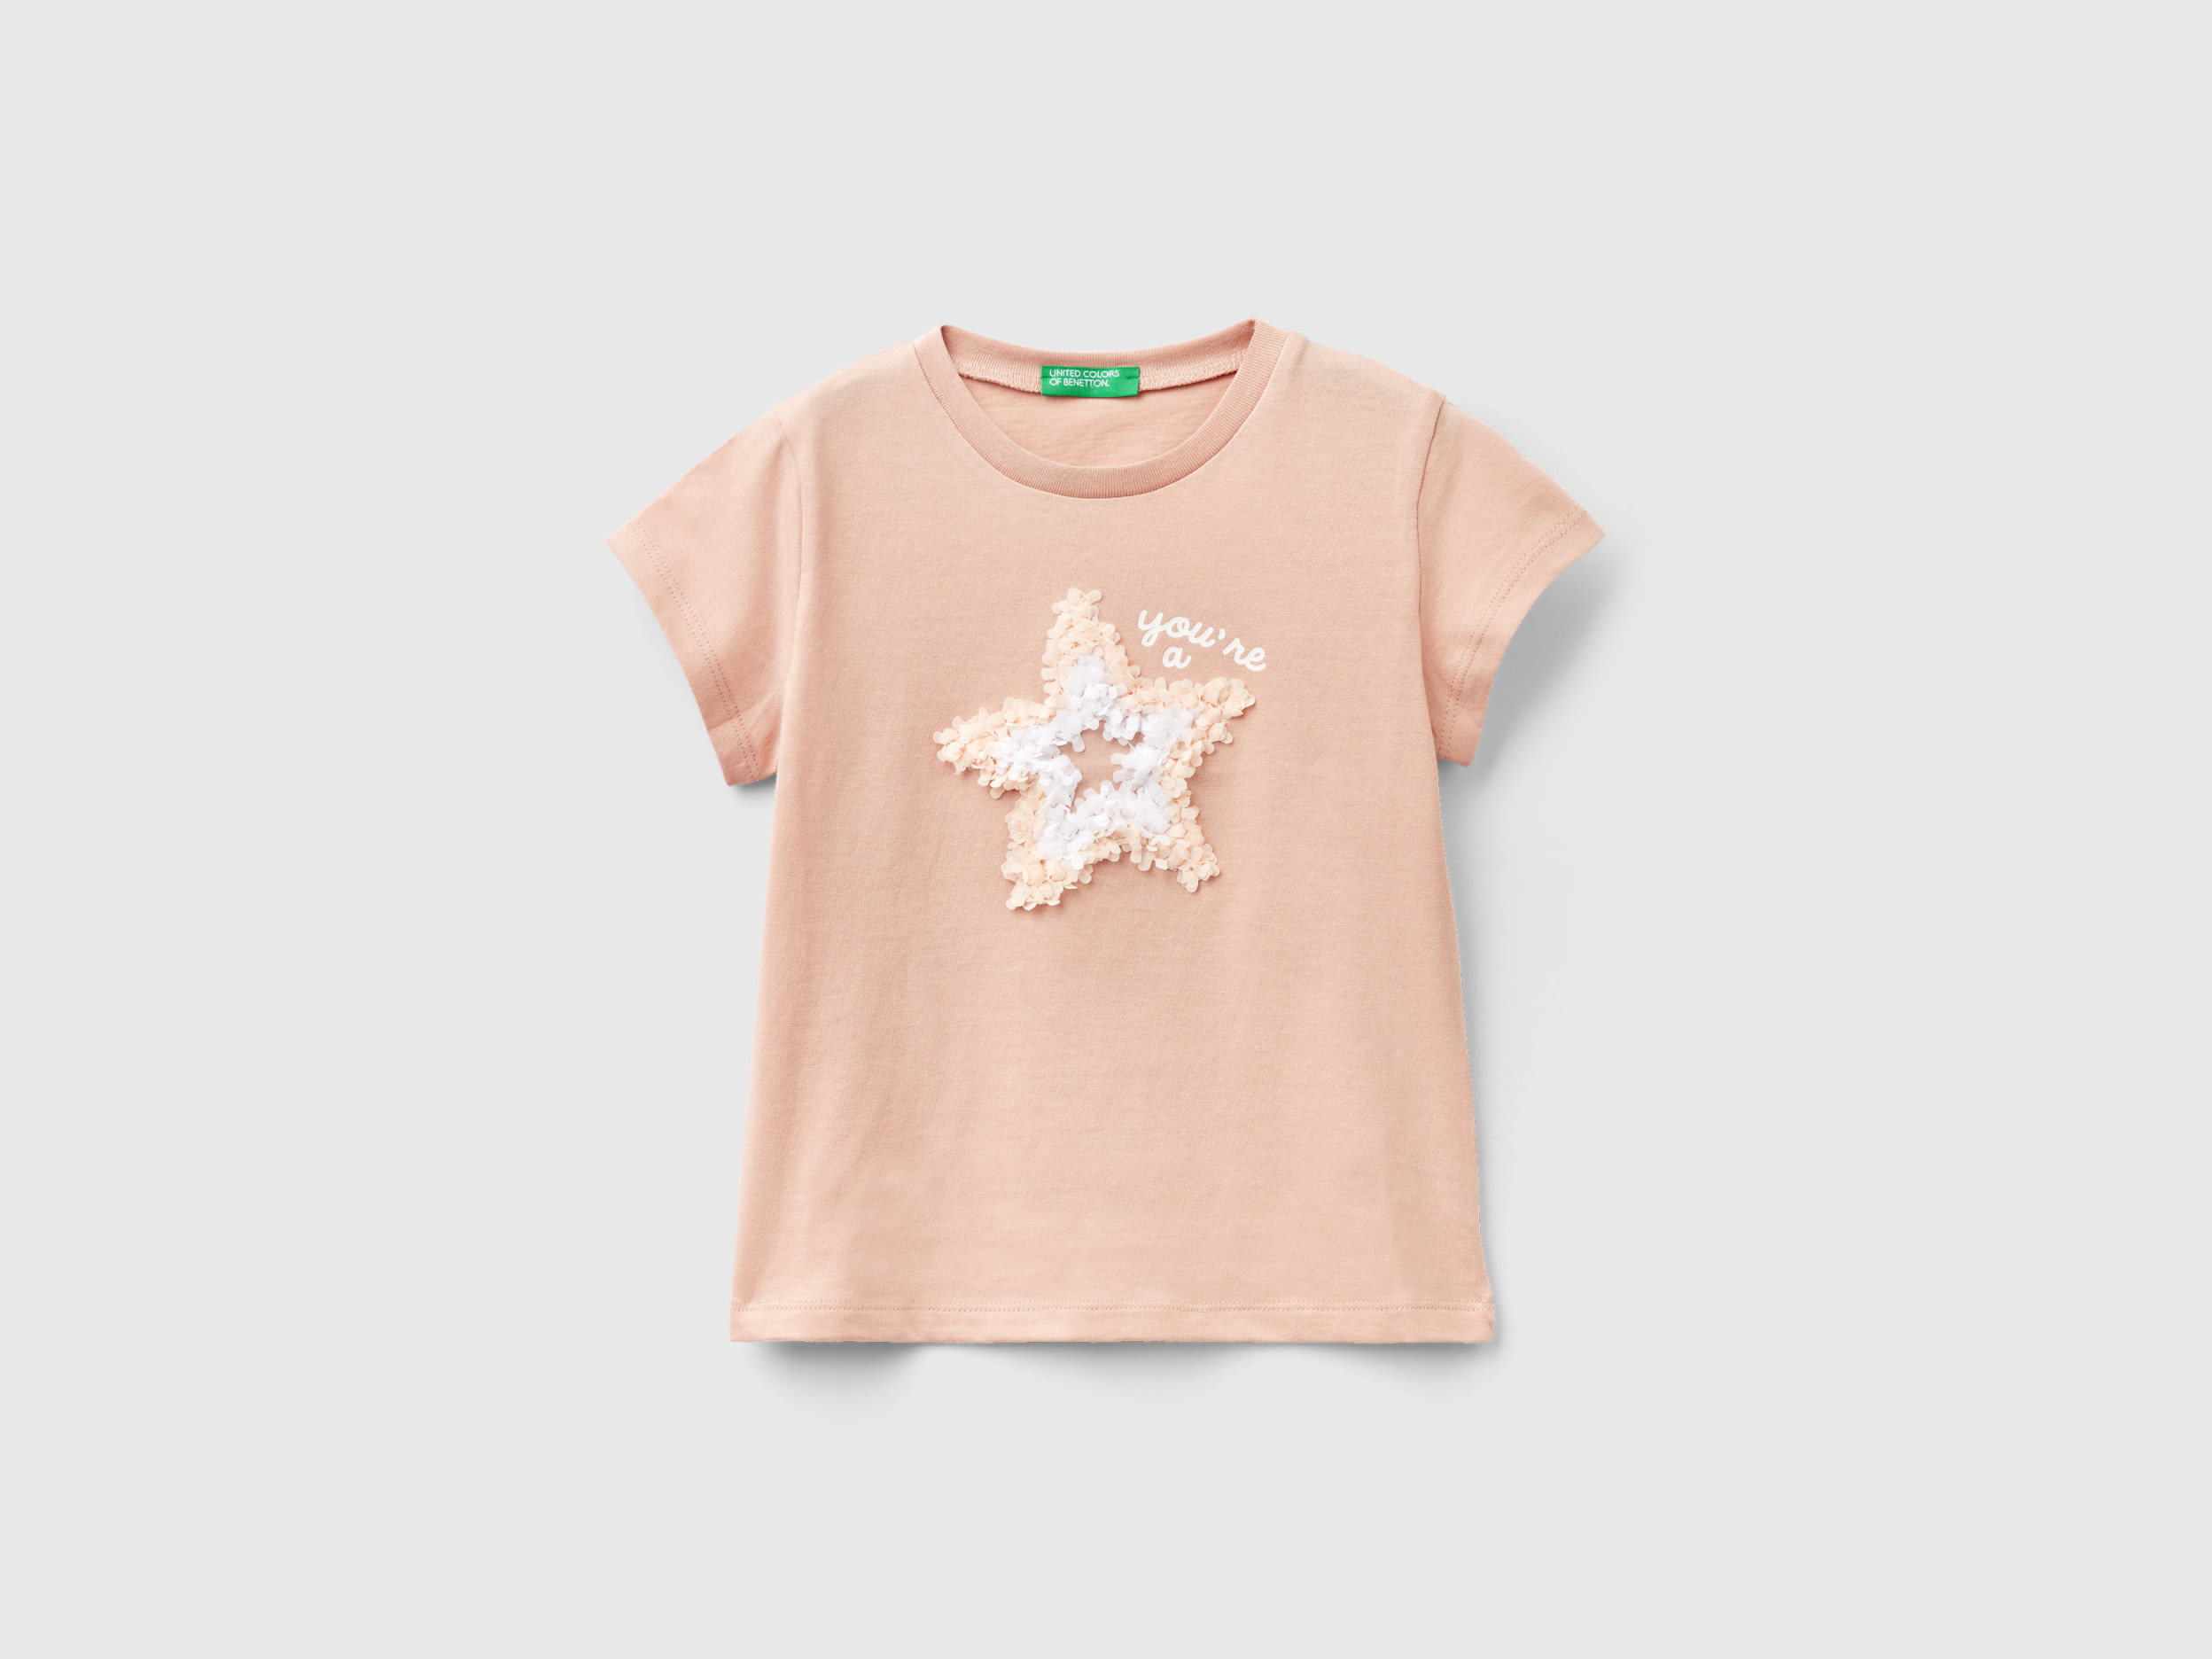 Image of Benetton, T-shirt With Petal Effect Applique, size 110, Soft Pink, Kids